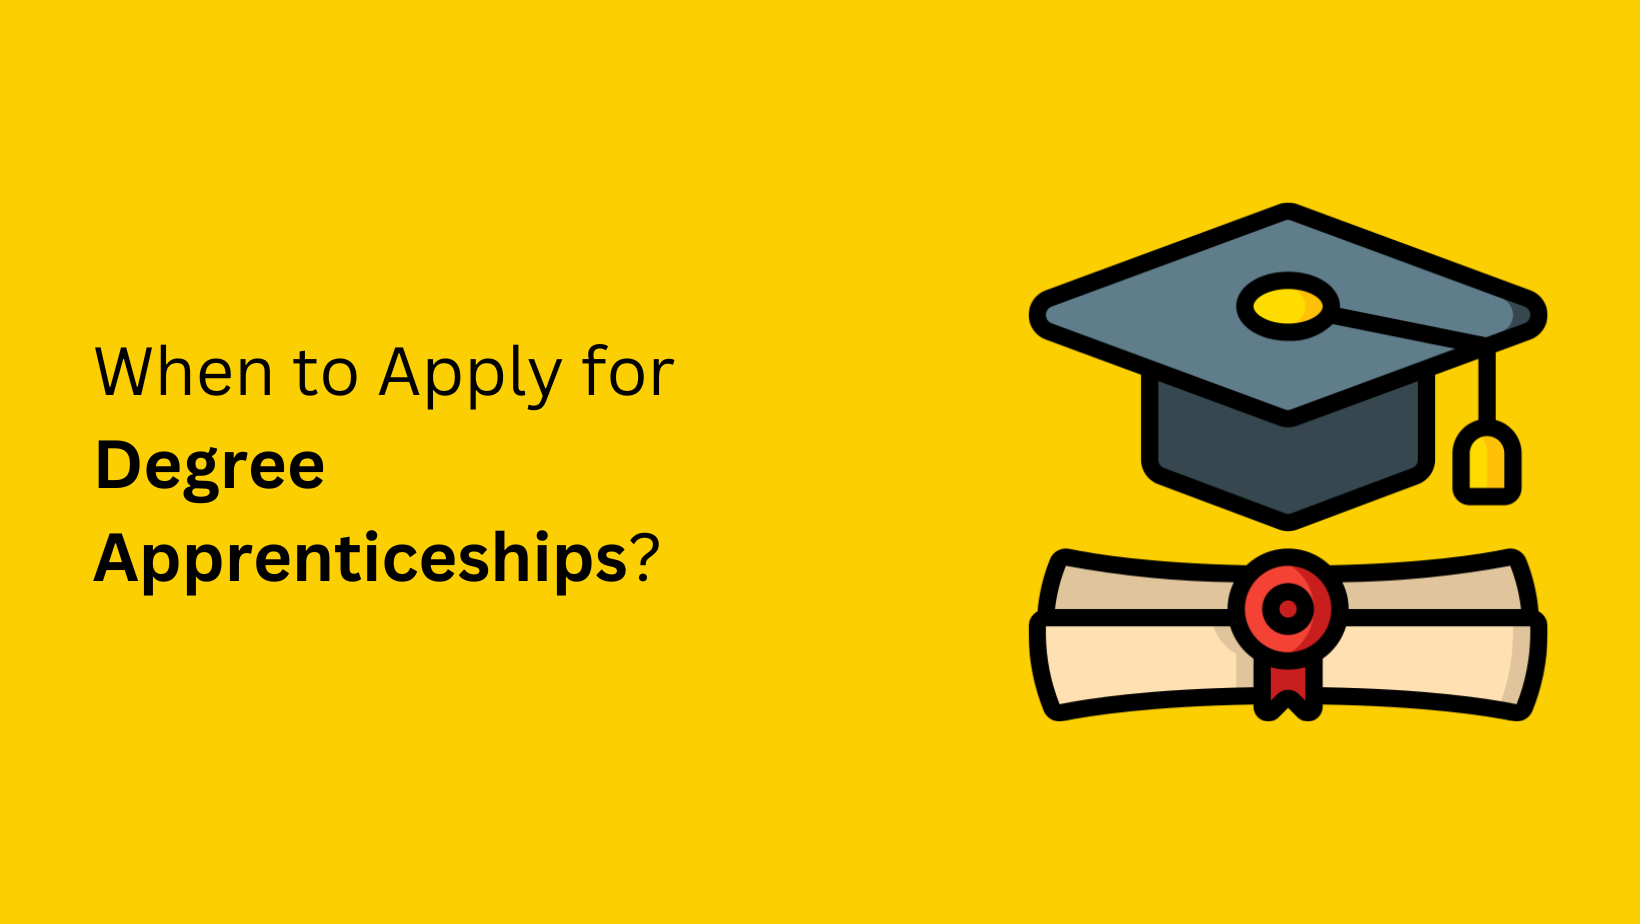 When to Apply for Degree Apprenticeships